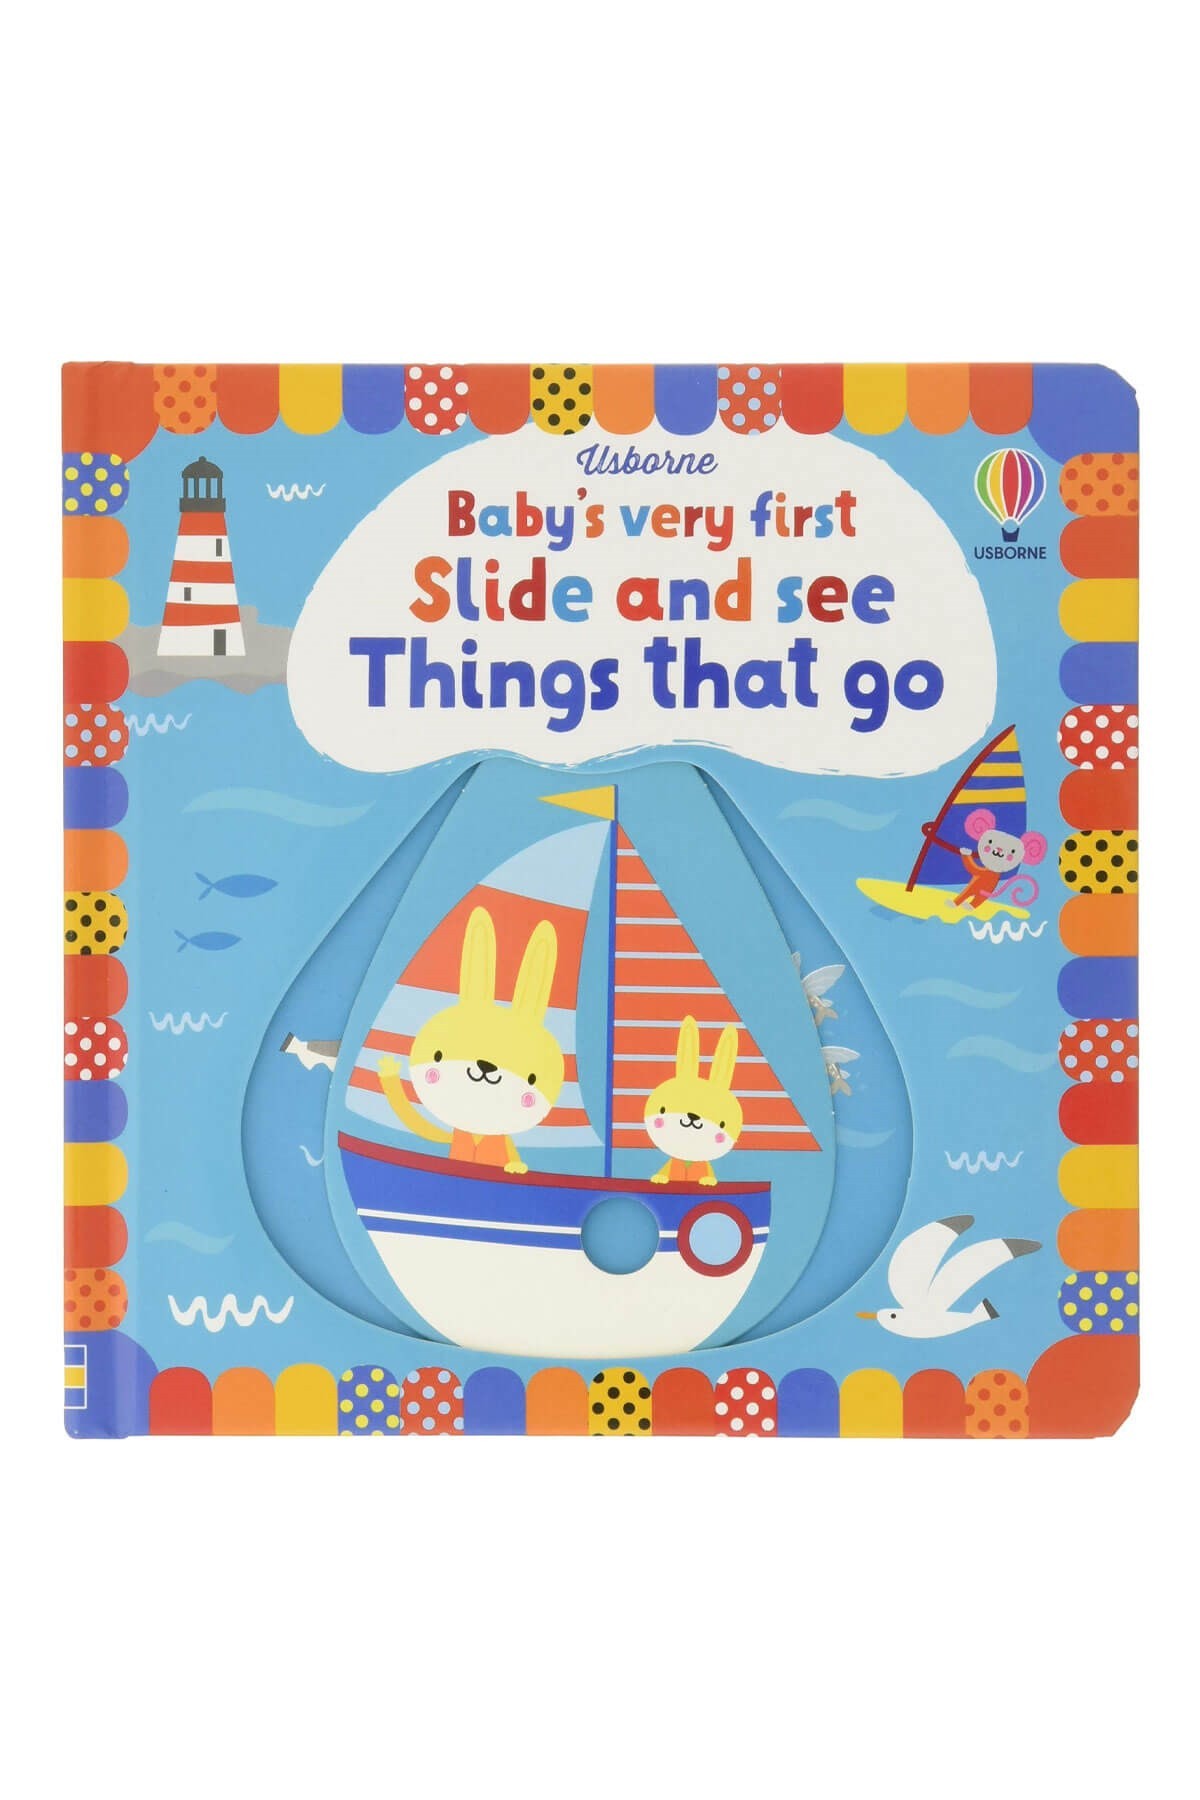 The Usborne Baby's Very First Slide and See Things That Go